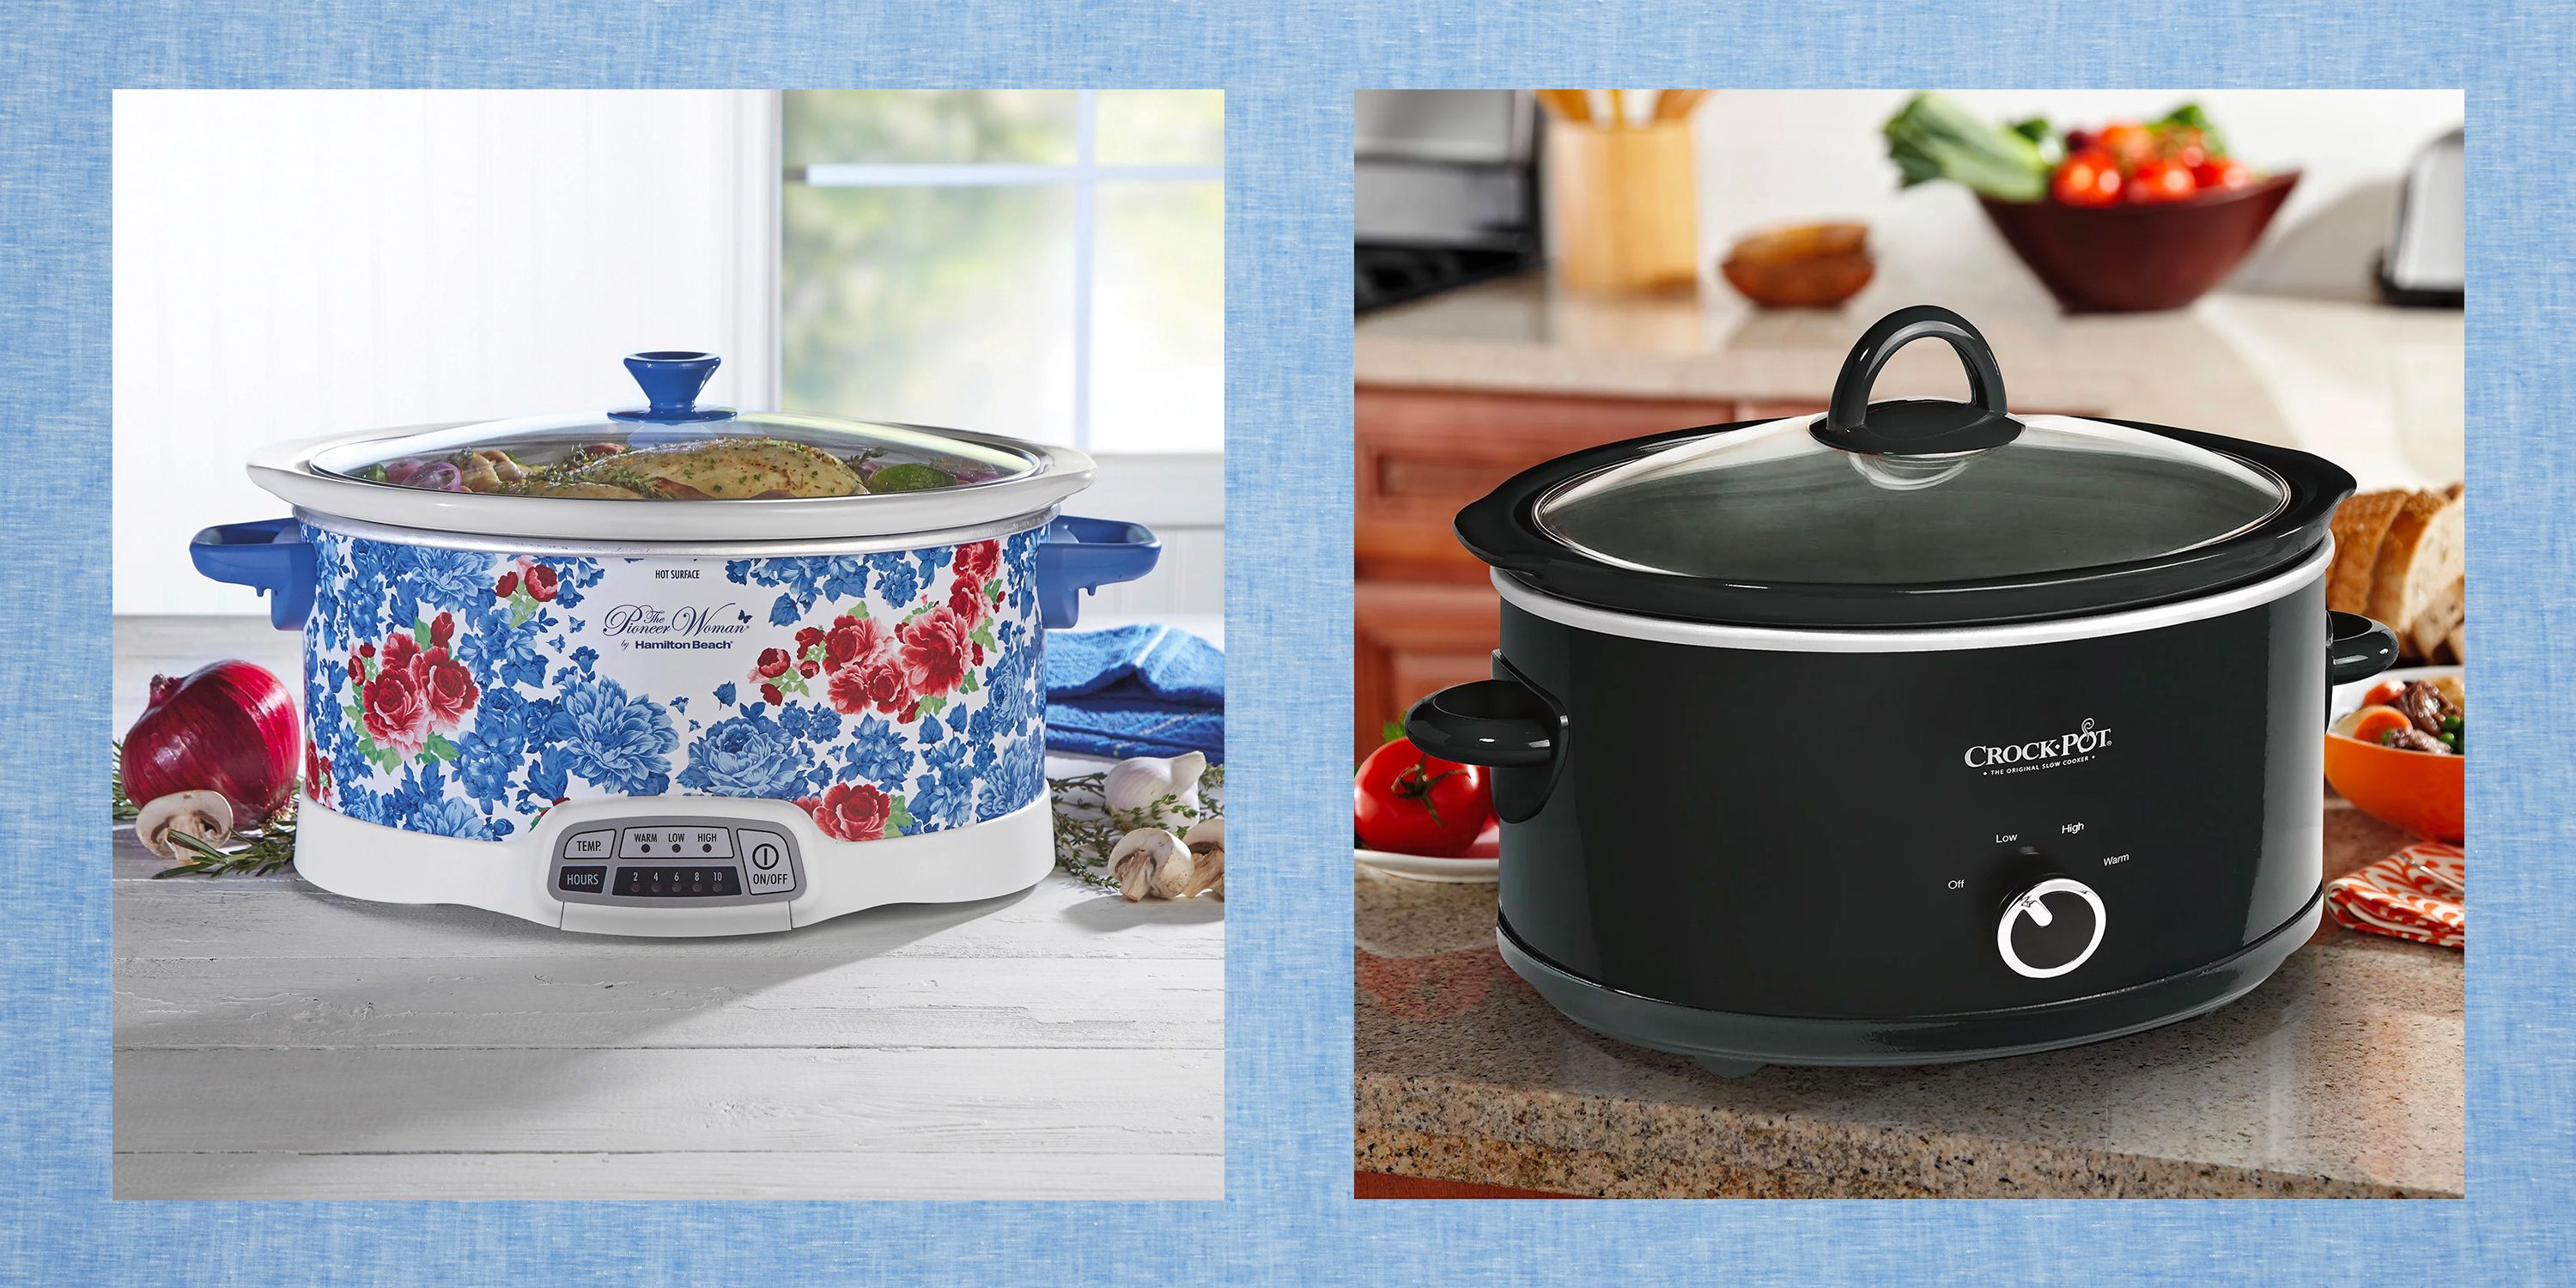 10 Best Slow Cookers to Buy in 2023 - Top Rated Crock Pots